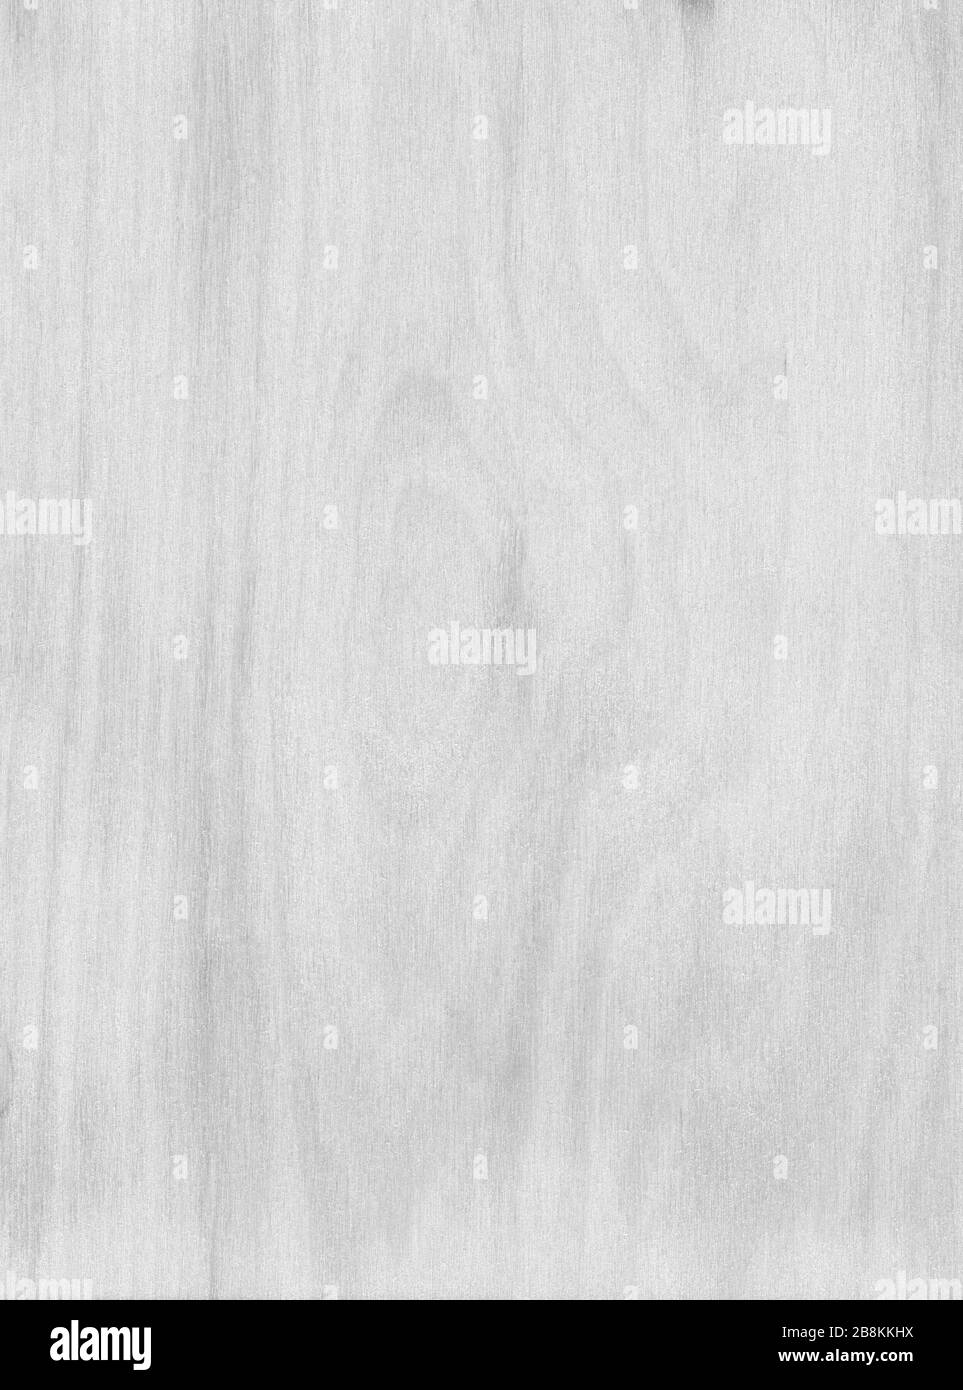 Abstract monochrome wooden background. Black and white varnished wood texture in grunge style. Close-up, top view, natural material of gray color. Stock Photo